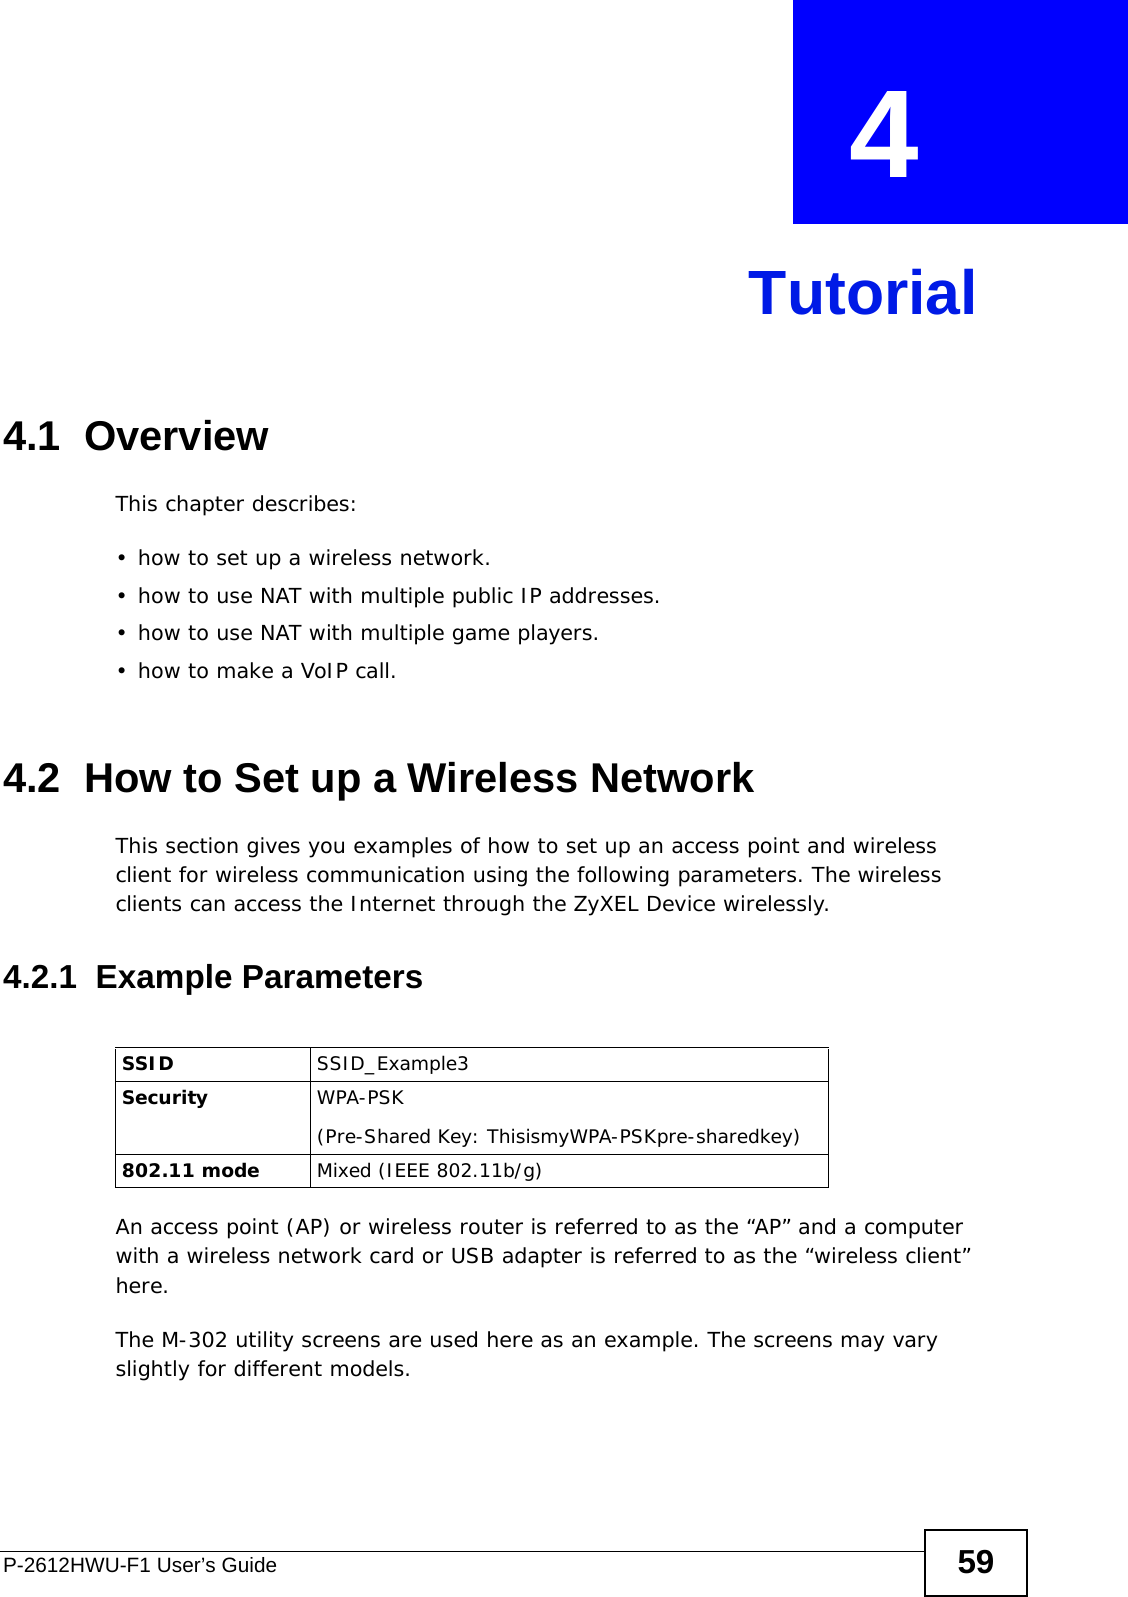 P-2612HWU-F1 User’s Guide 59CHAPTER  4 Tutorial4.1  OverviewThis chapter describes:• how to set up a wireless network.• how to use NAT with multiple public IP addresses.• how to use NAT with multiple game players.• how to make a VoIP call.4.2  How to Set up a Wireless NetworkThis section gives you examples of how to set up an access point and wireless client for wireless communication using the following parameters. The wireless clients can access the Internet through the ZyXEL Device wirelessly.4.2.1  Example ParametersAn access point (AP) or wireless router is referred to as the “AP” and a computer with a wireless network card or USB adapter is referred to as the “wireless client” here.The M-302 utility screens are used here as an example. The screens may vary slightly for different models.SSID SSID_Example3Security  WPA-PSK(Pre-Shared Key: ThisismyWPA-PSKpre-sharedkey)802.11 mode Mixed (IEEE 802.11b/g)